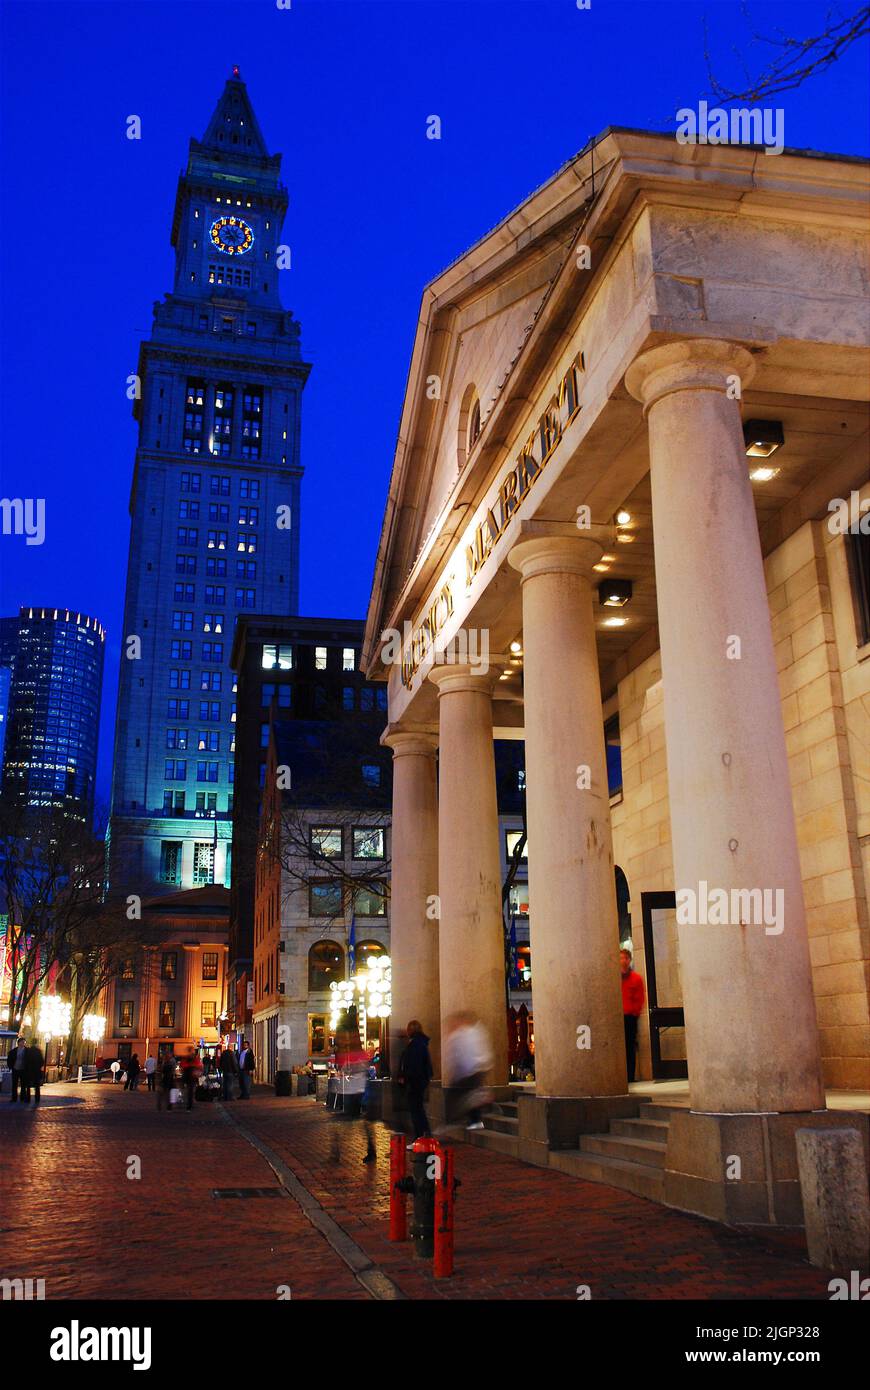 The lights of the historic Quincy Market and Custom House in Boston are illuminated and reflected in the city streets on a rainy winter day at dusk Stock Photo